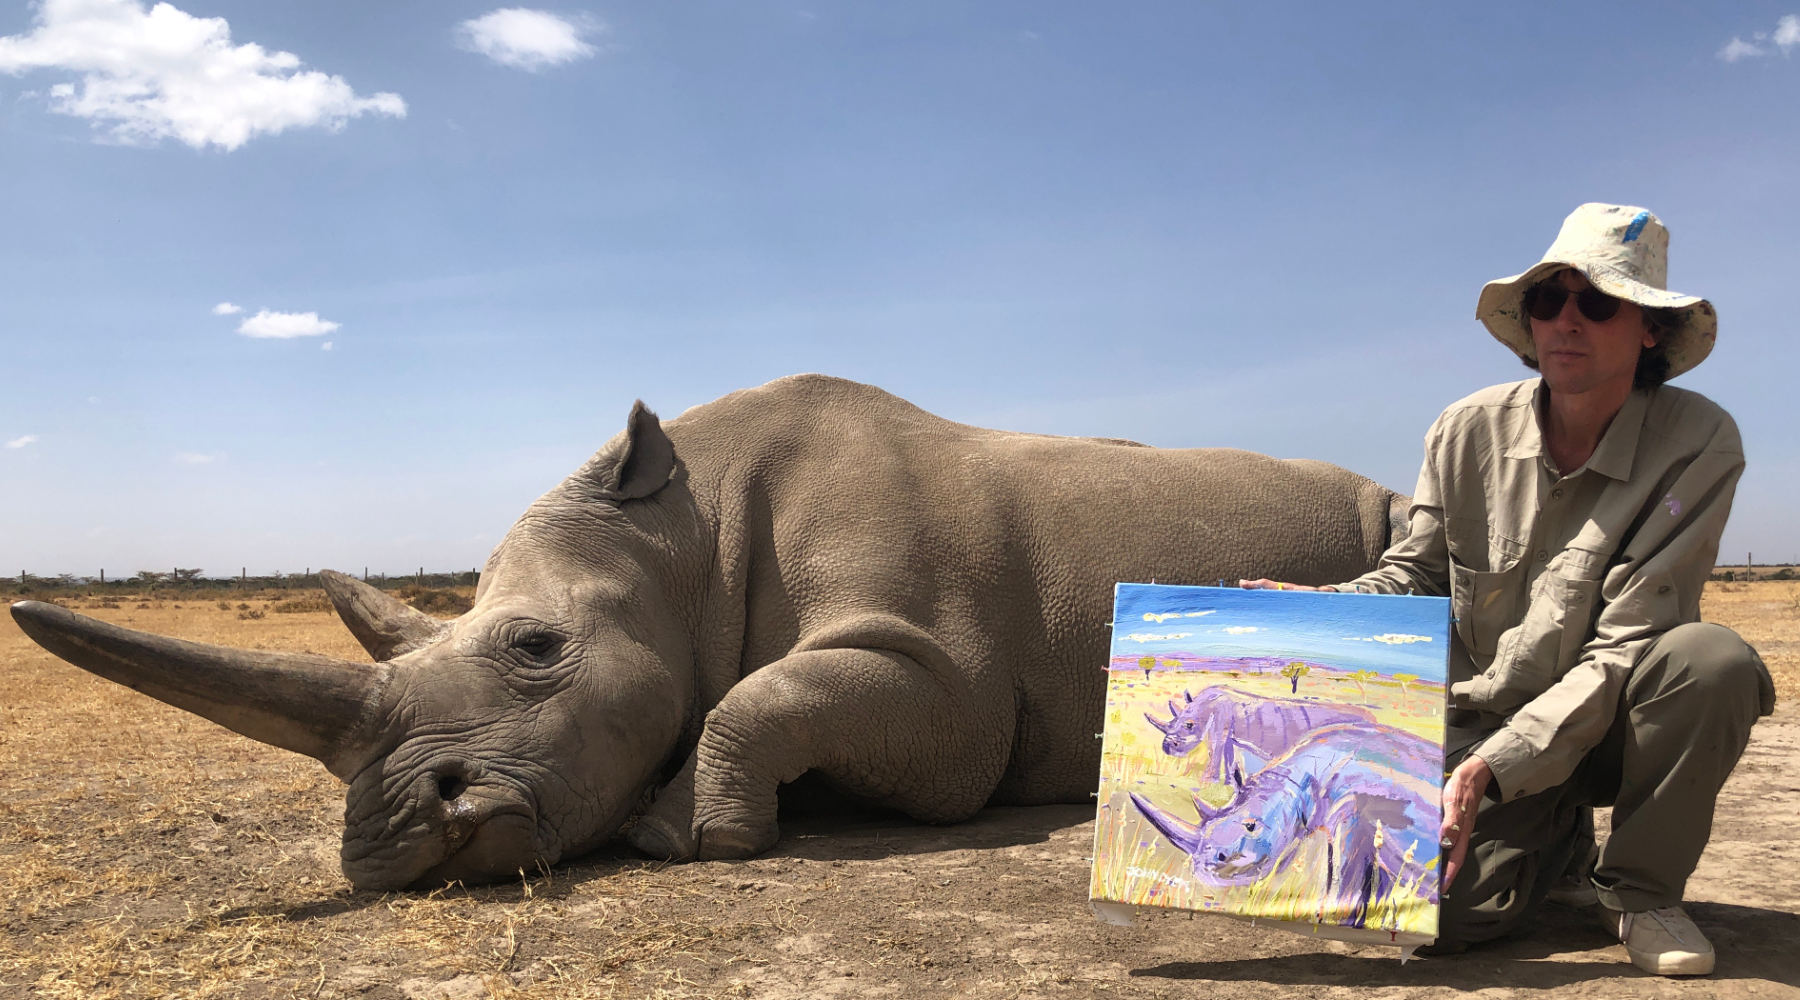 British artist pictured with one of the last two Northern White Rhino at OlPejeta conservancy in Kenya, Africa with a painting he created from life with the animals.